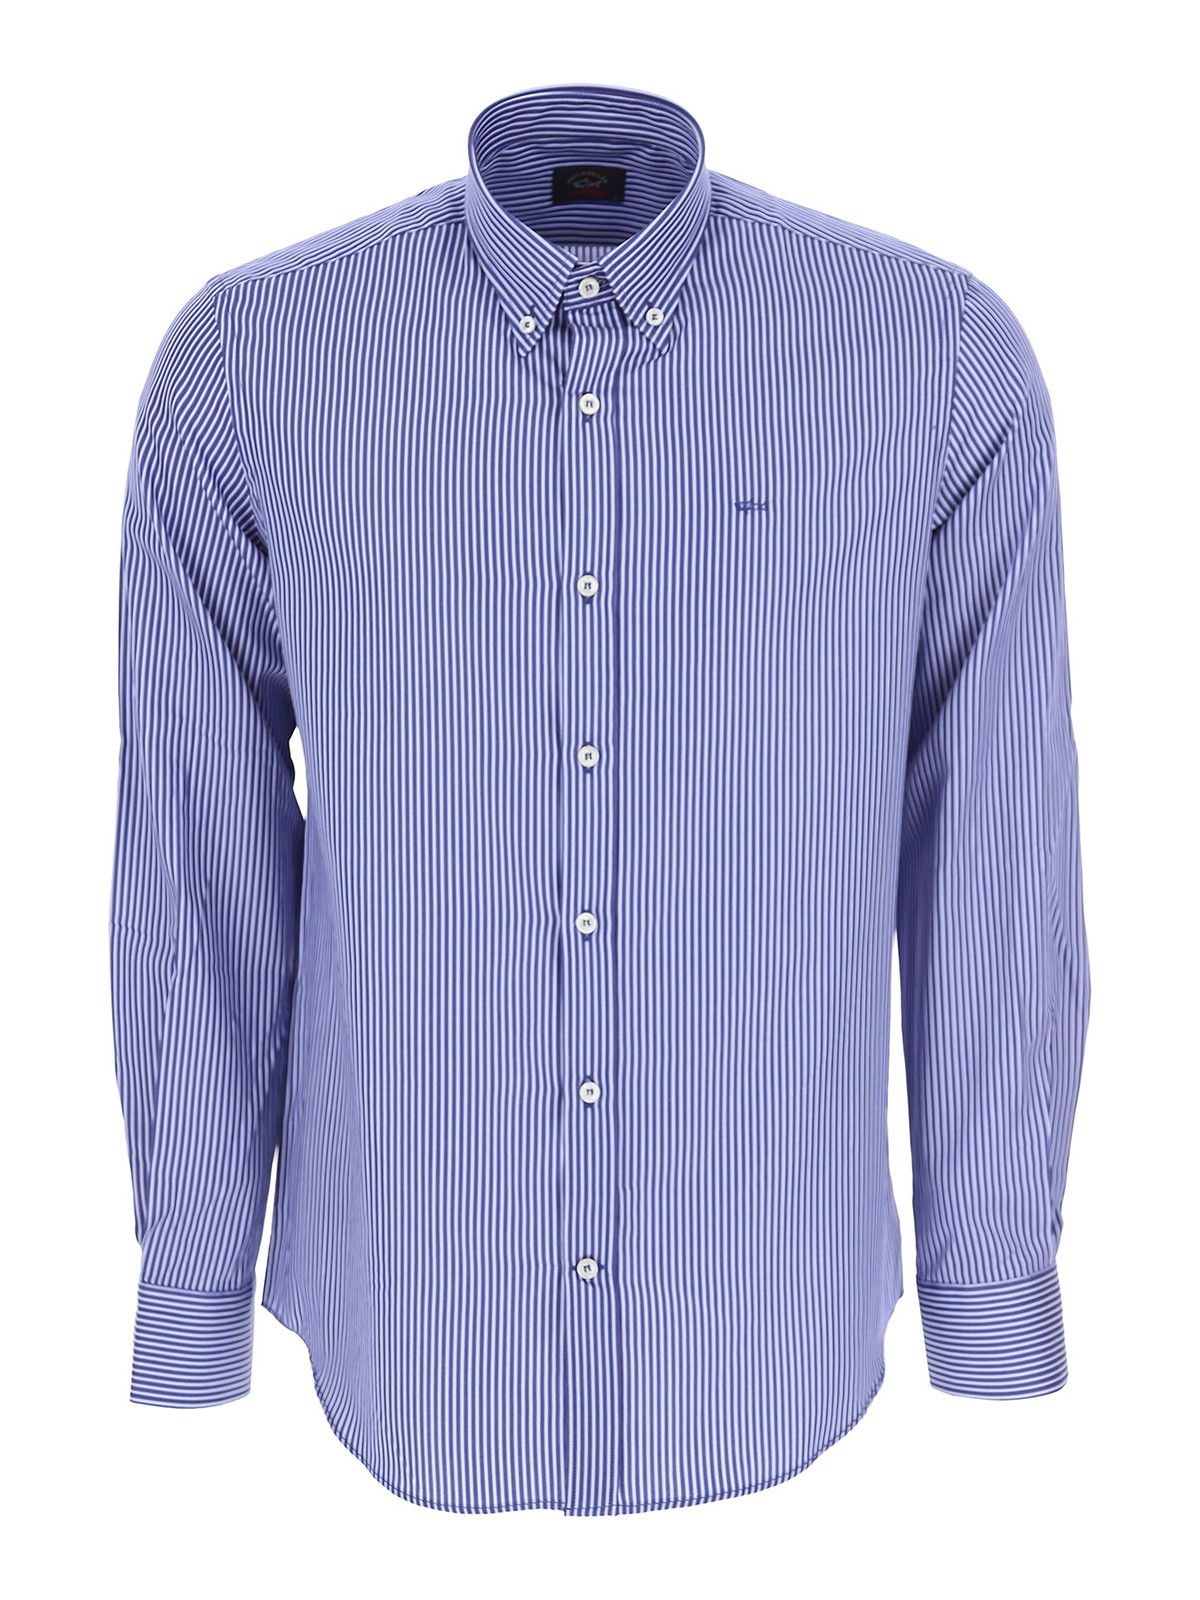 Paul & Shark Striped Shirt With Button Collar In Multi